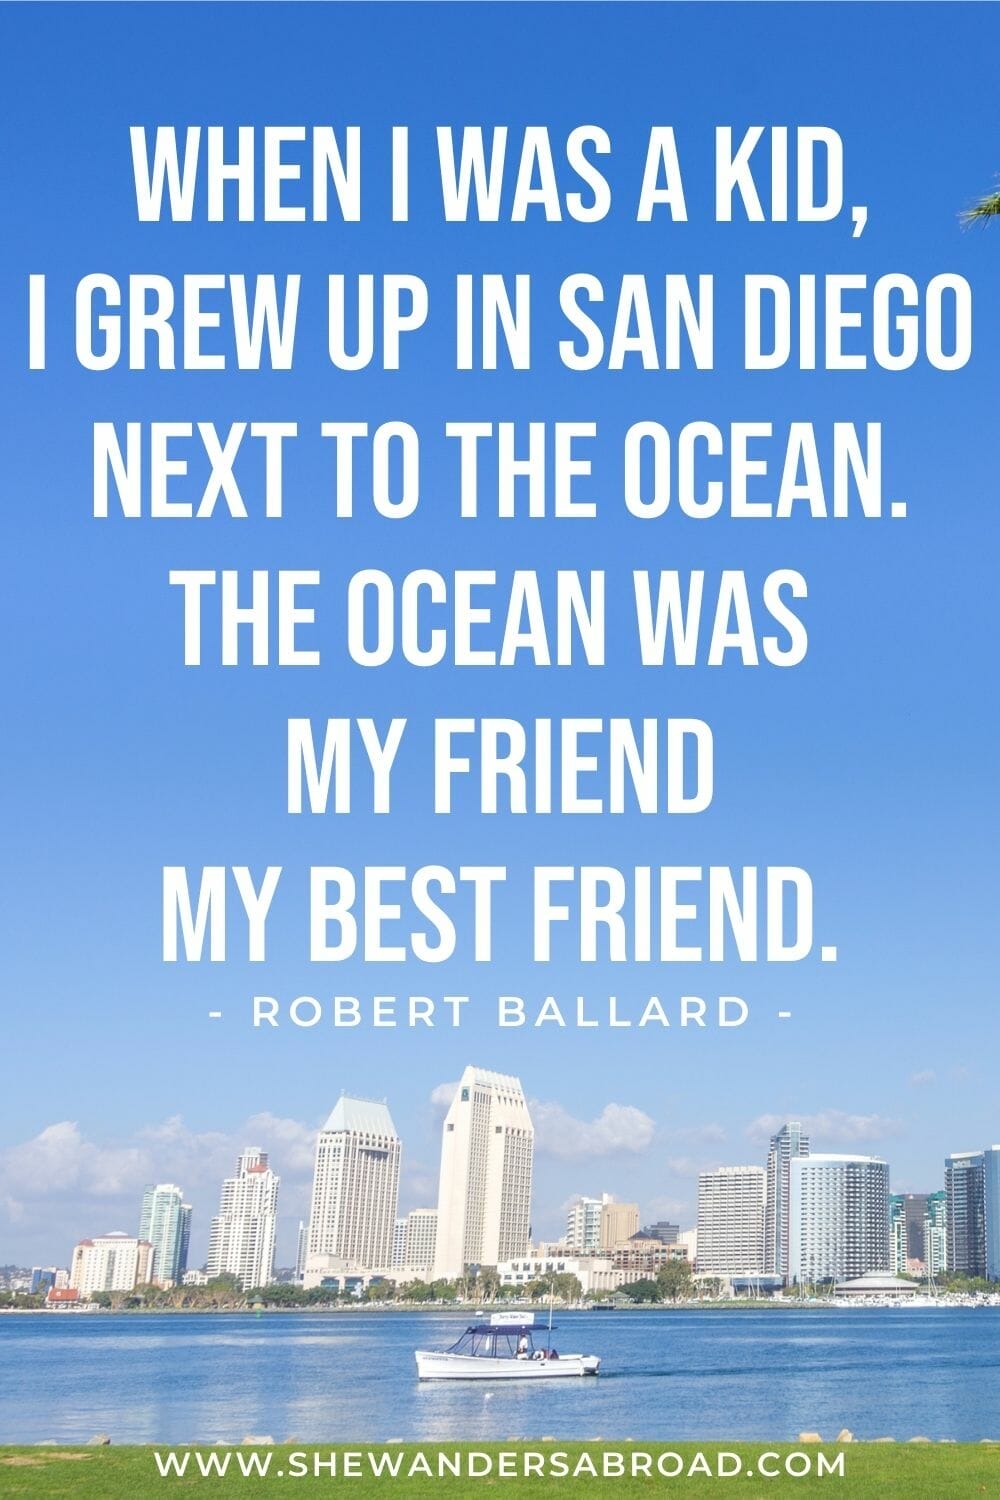 Best San Diego Quotes for Instagram